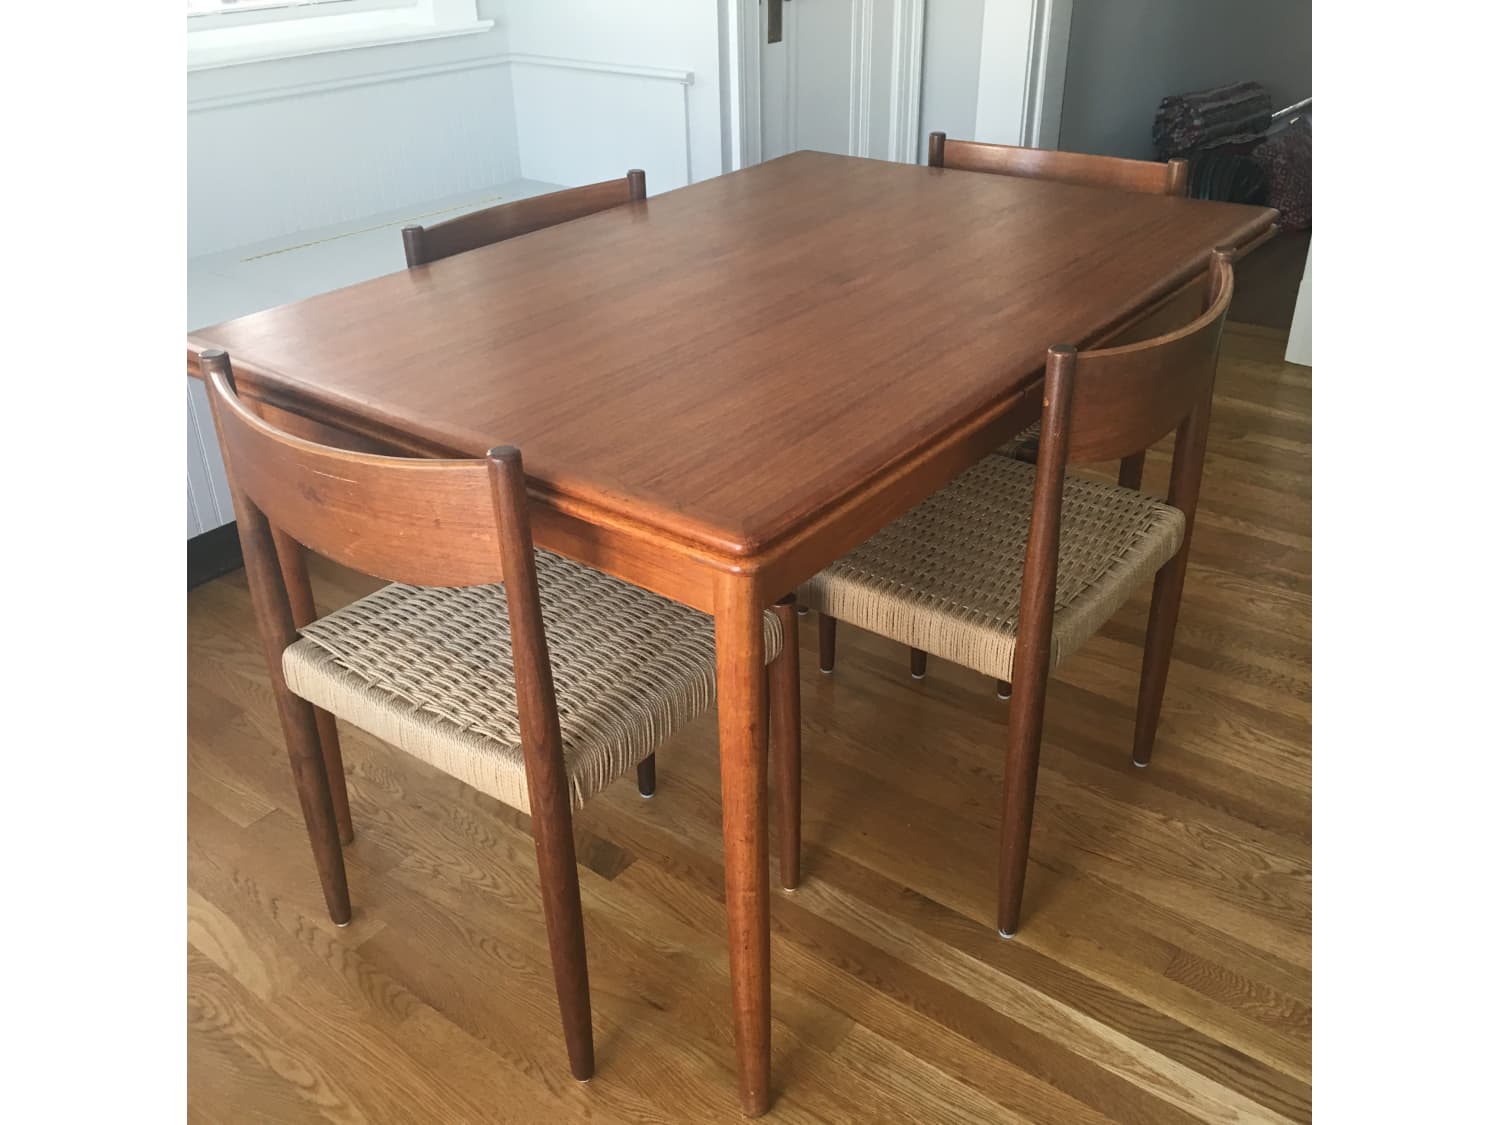 MCM Dining Table and Chairs - Apartment Therapy's Bazaar.